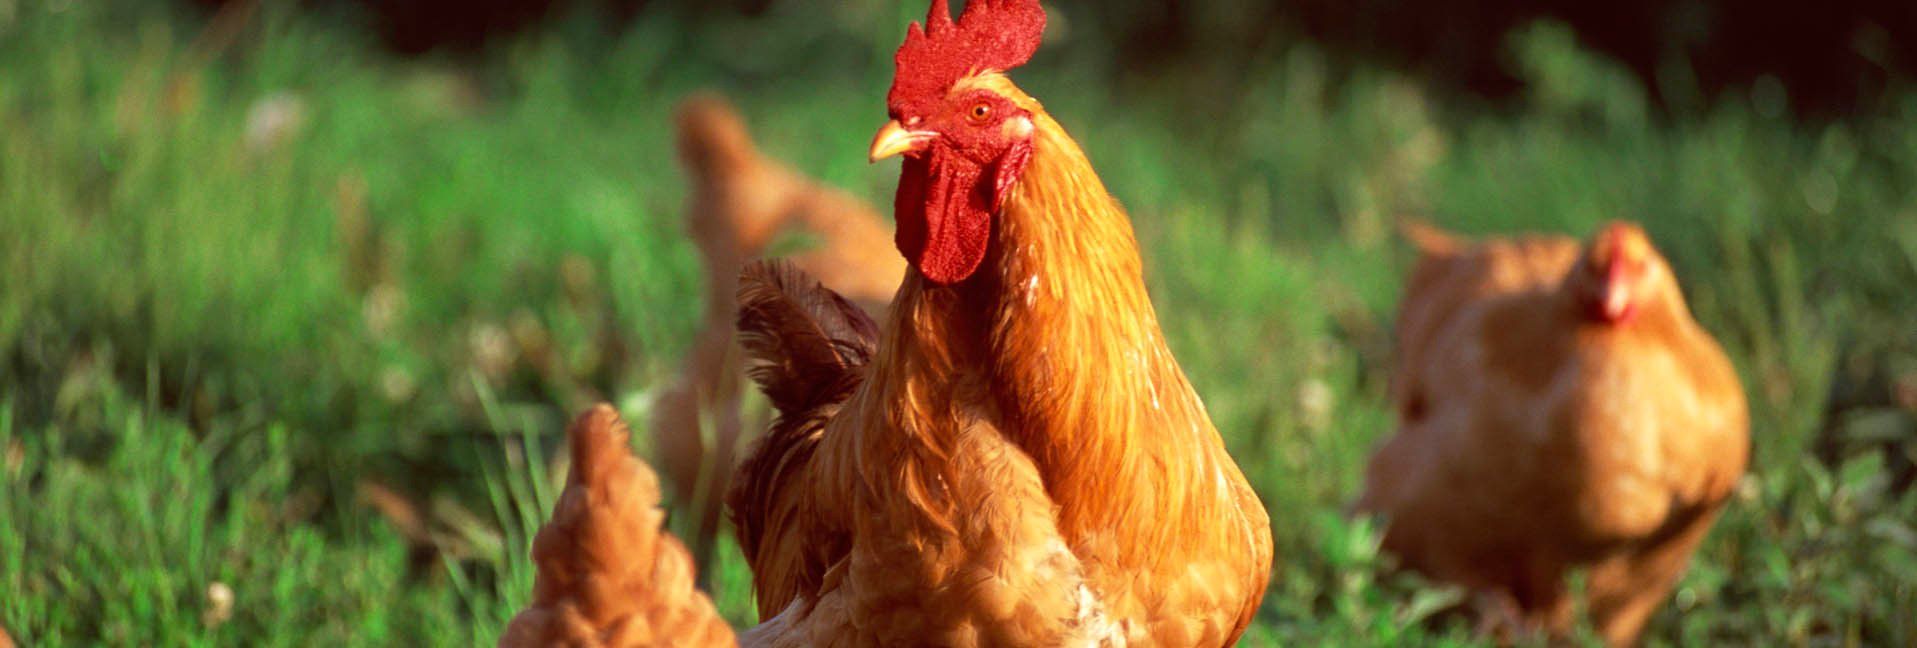 Backyard For A Reason - The dangers of handling poultry